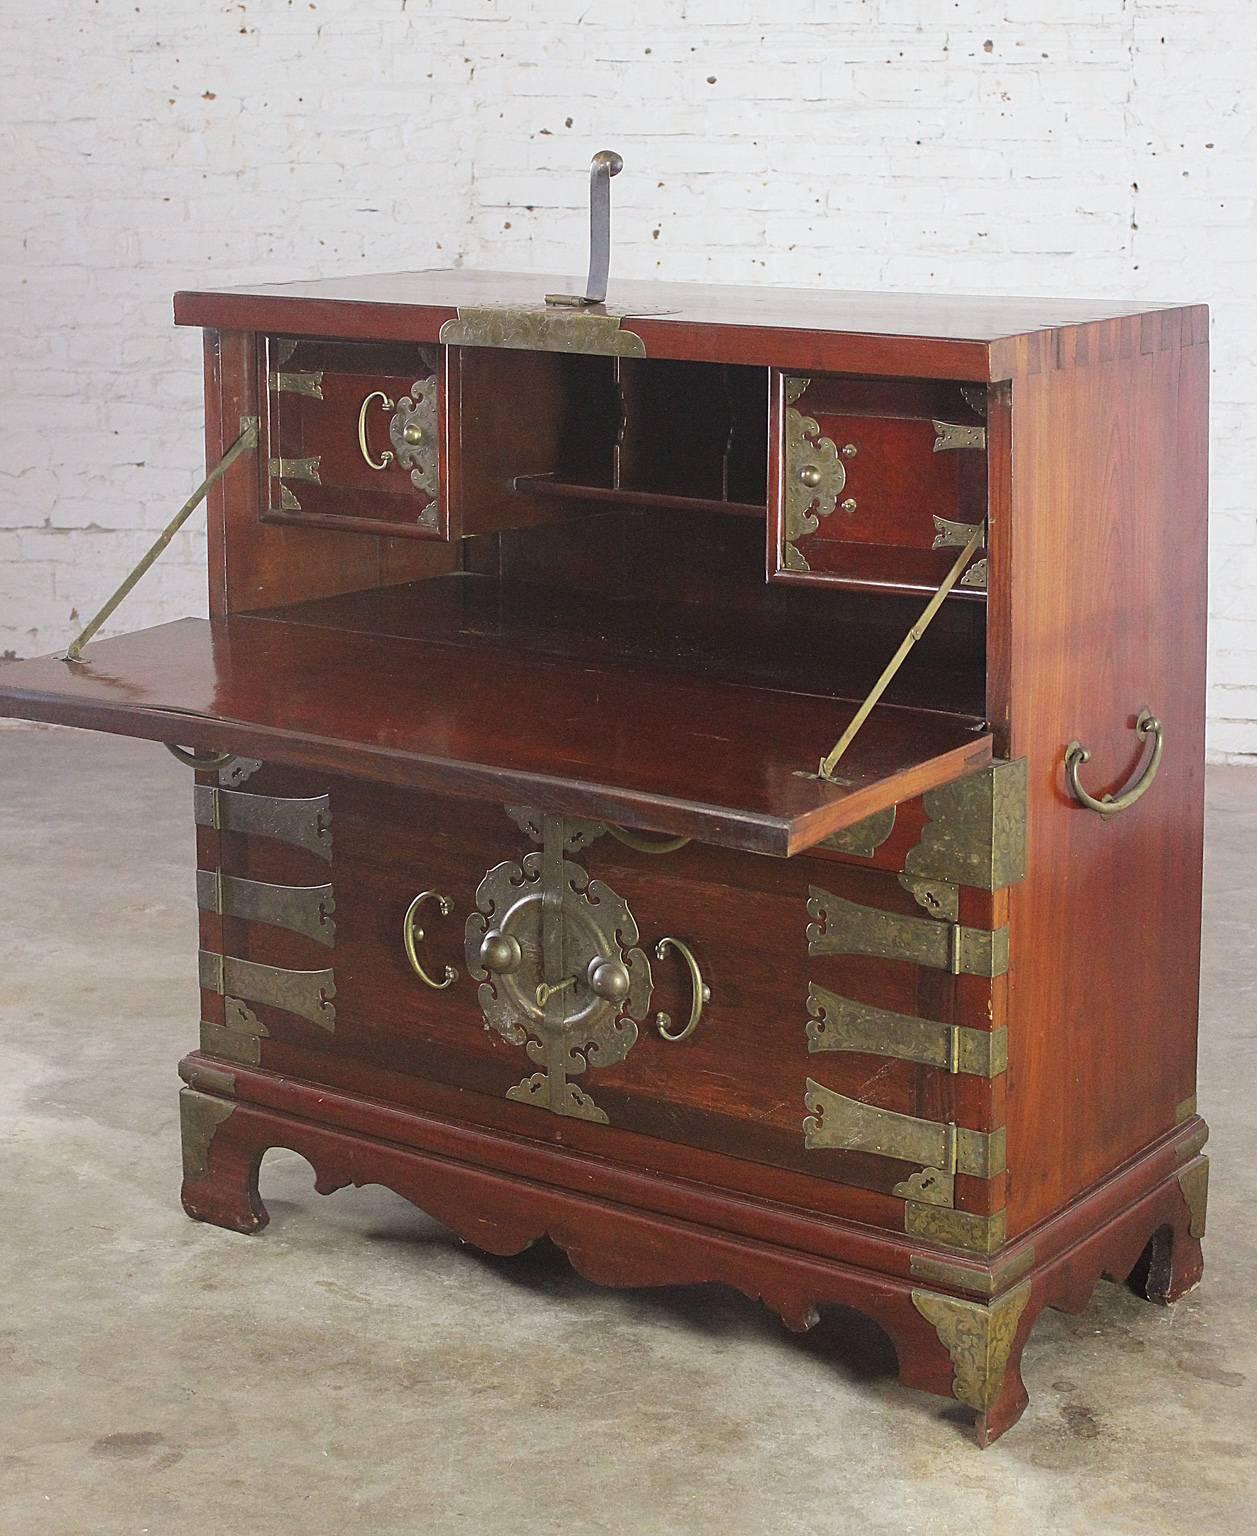 Impressive Asian Campaign-style secrétaire. All one piece construction with incredible brass embellishments and hardware. This Korean-style drop front desk is in wonderful vintage condition. Please see long description for details.

Gorgeous,